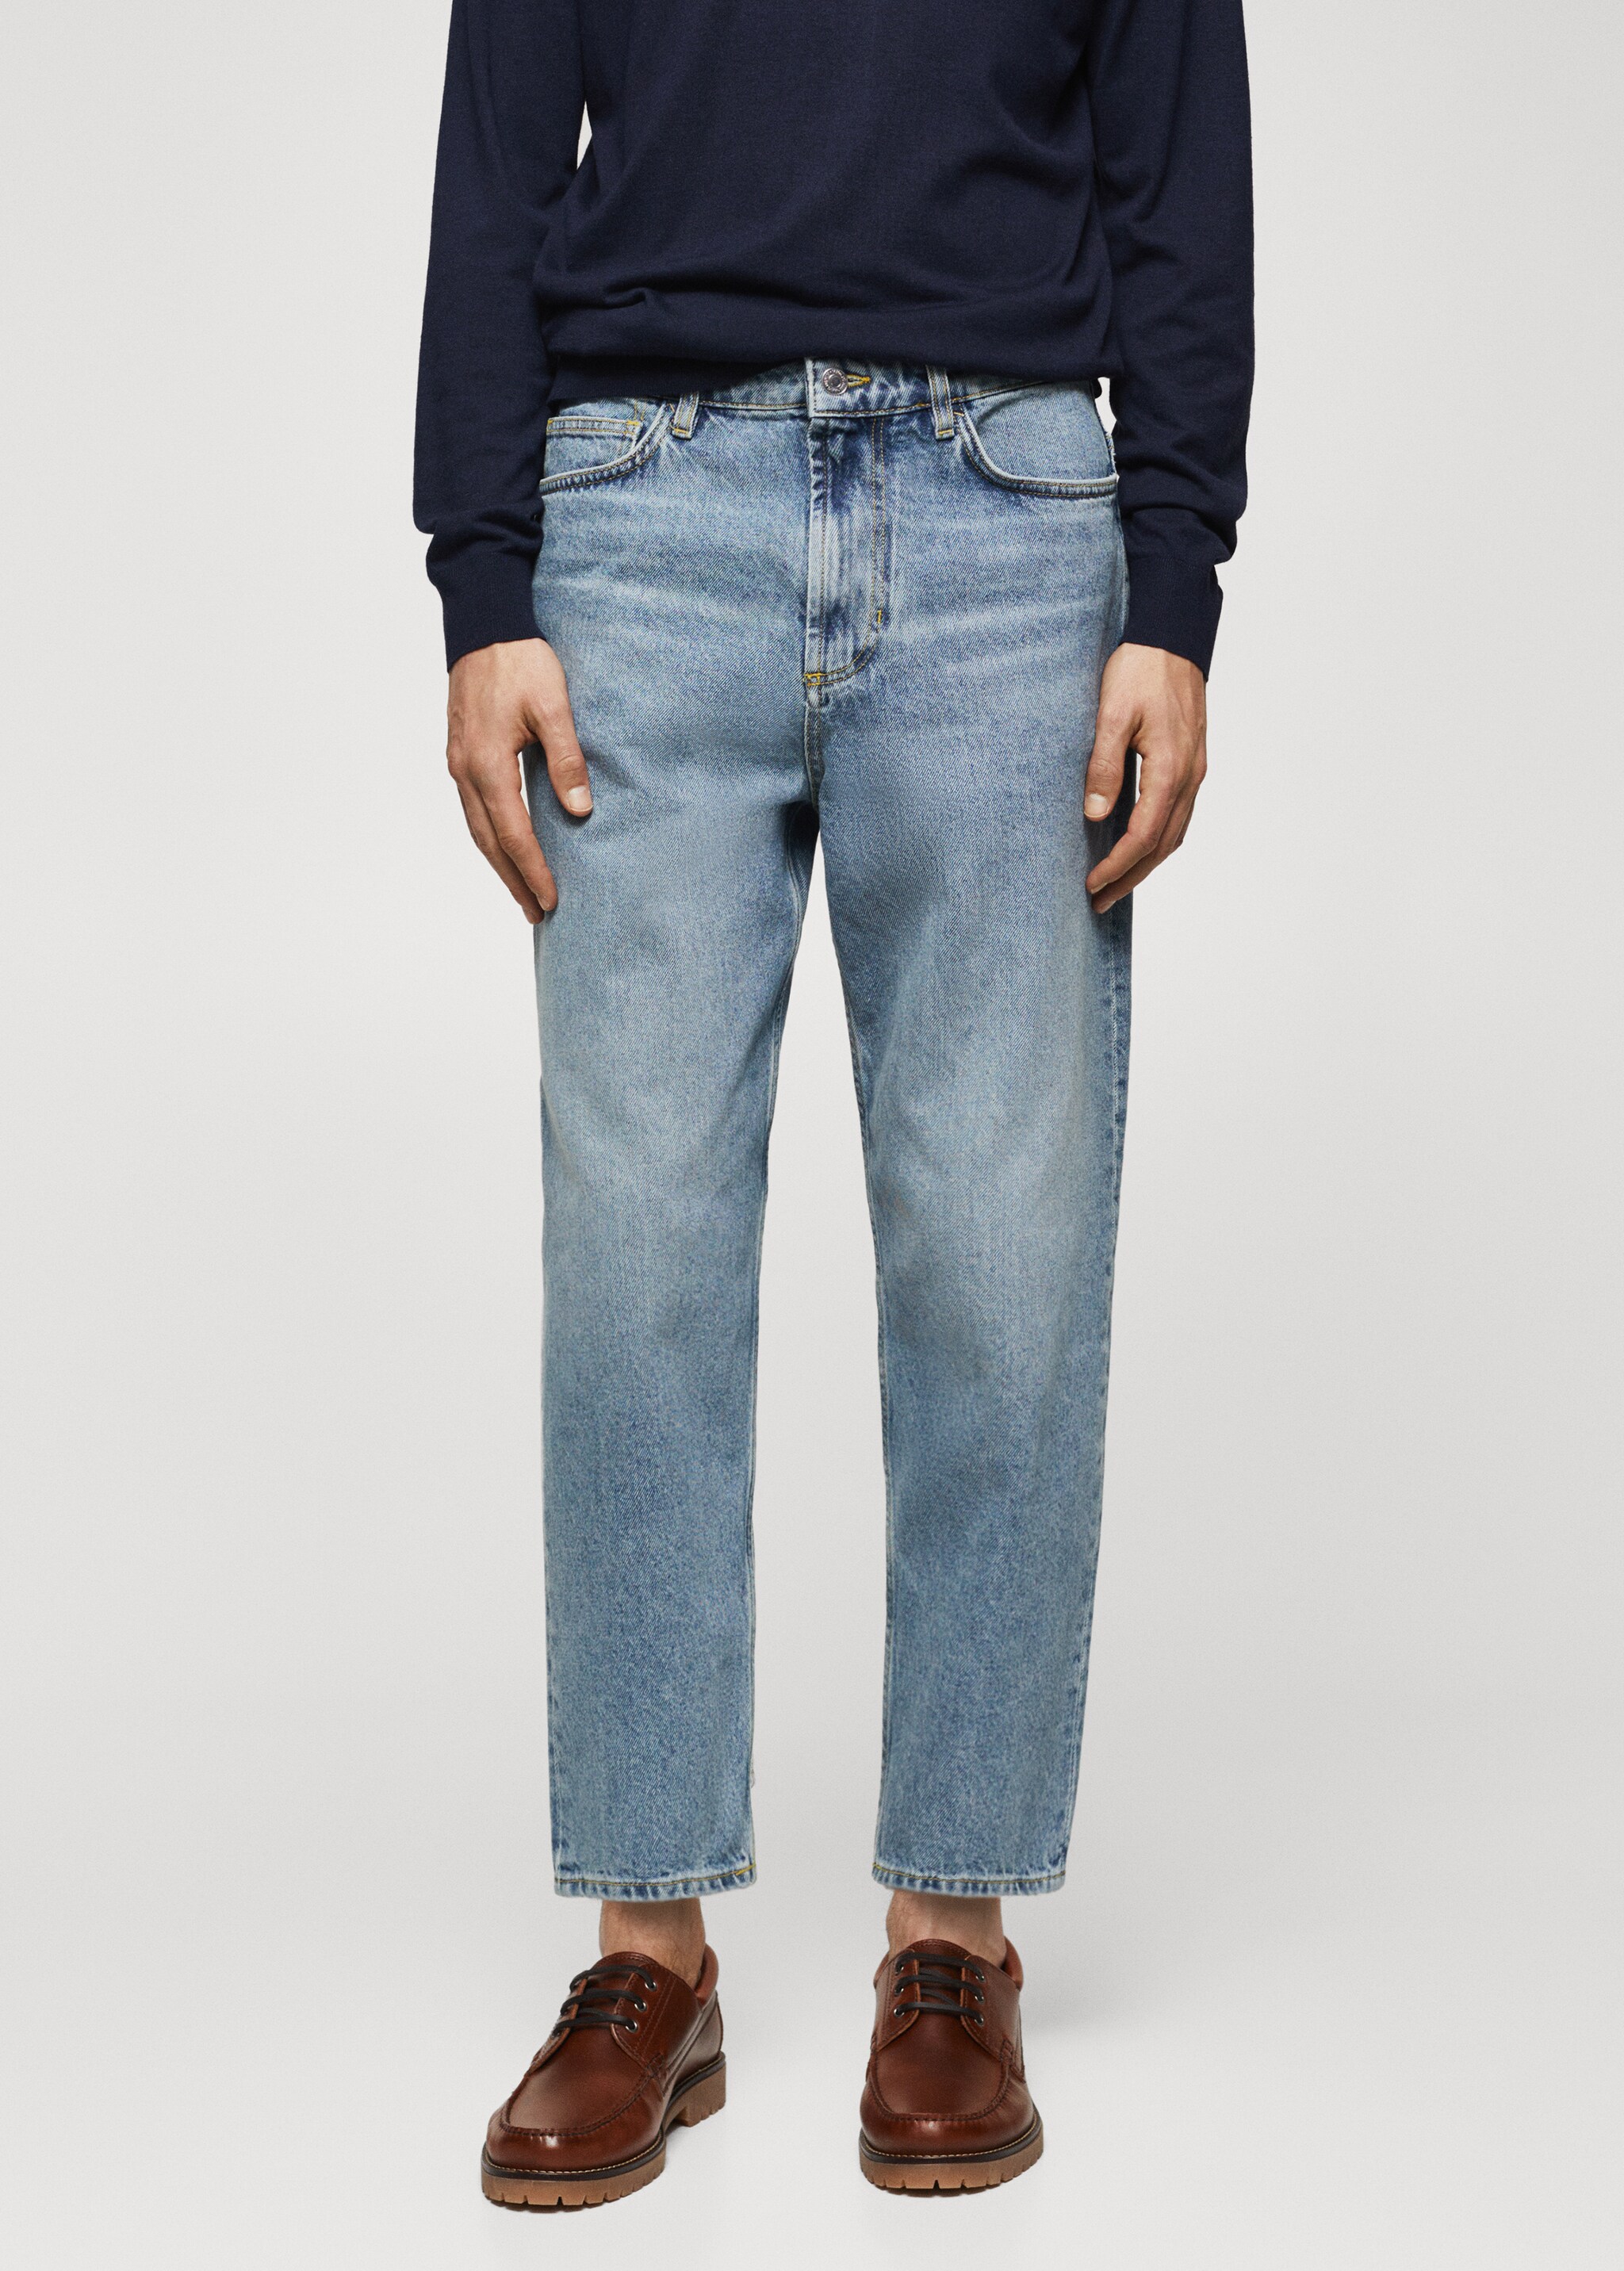 Jeans tapered loose cropped  - Plano medio